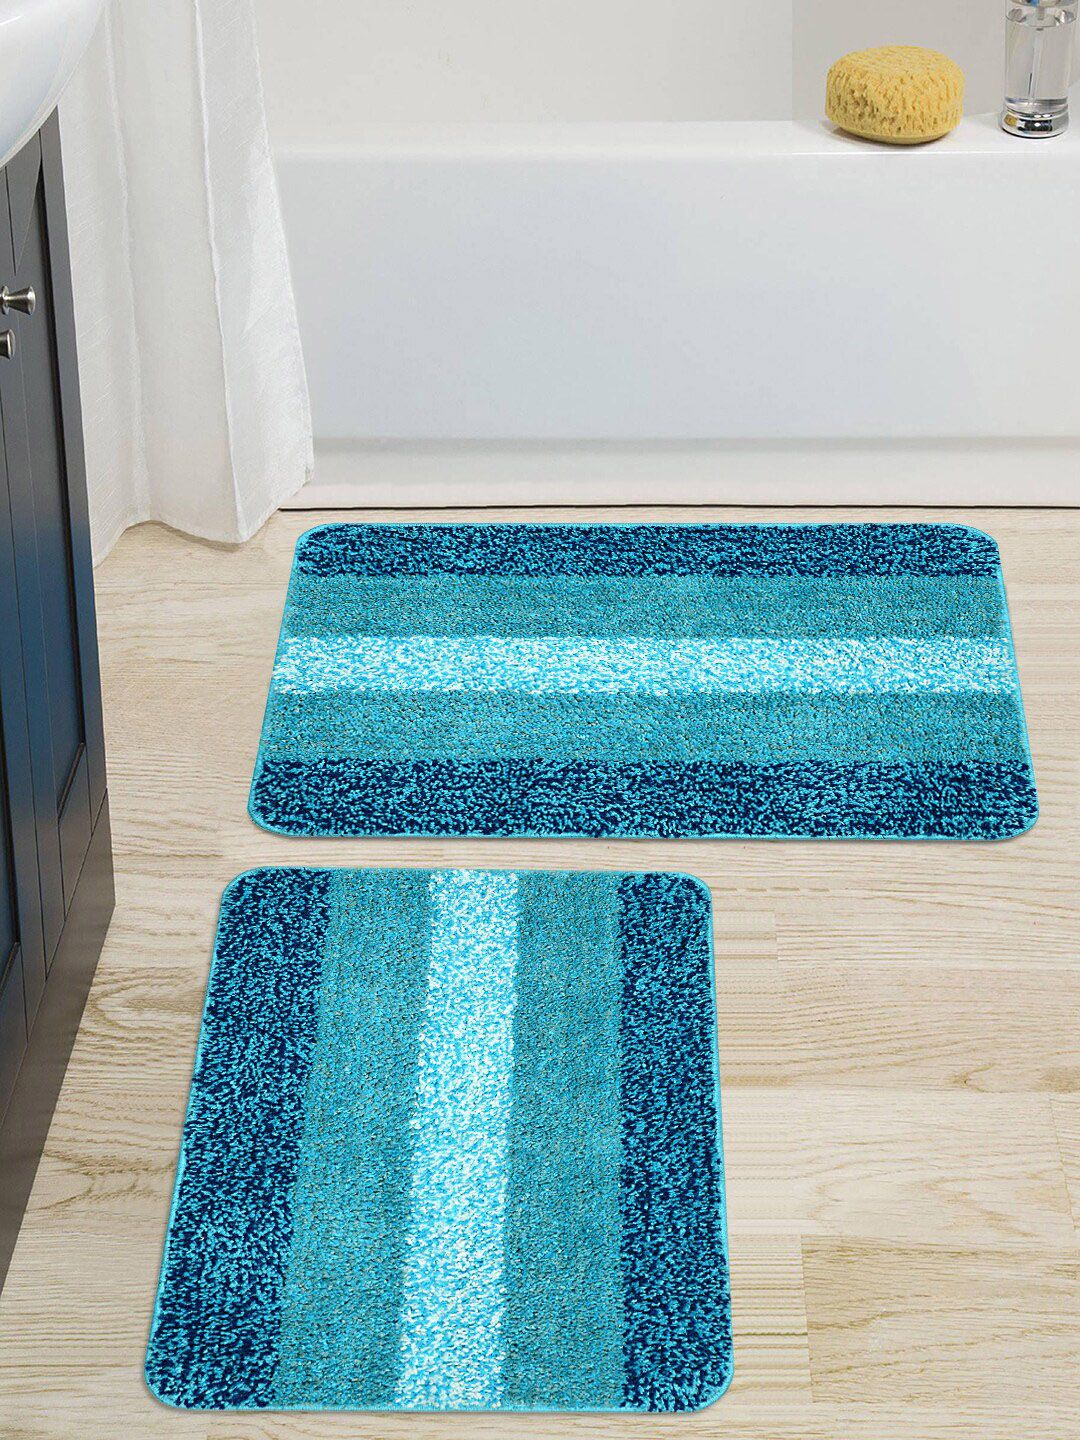 Saral Home Pack Of 2 Turquoise Blue & Teal Blue Striped Anti-Skid Bath Mats Price in India